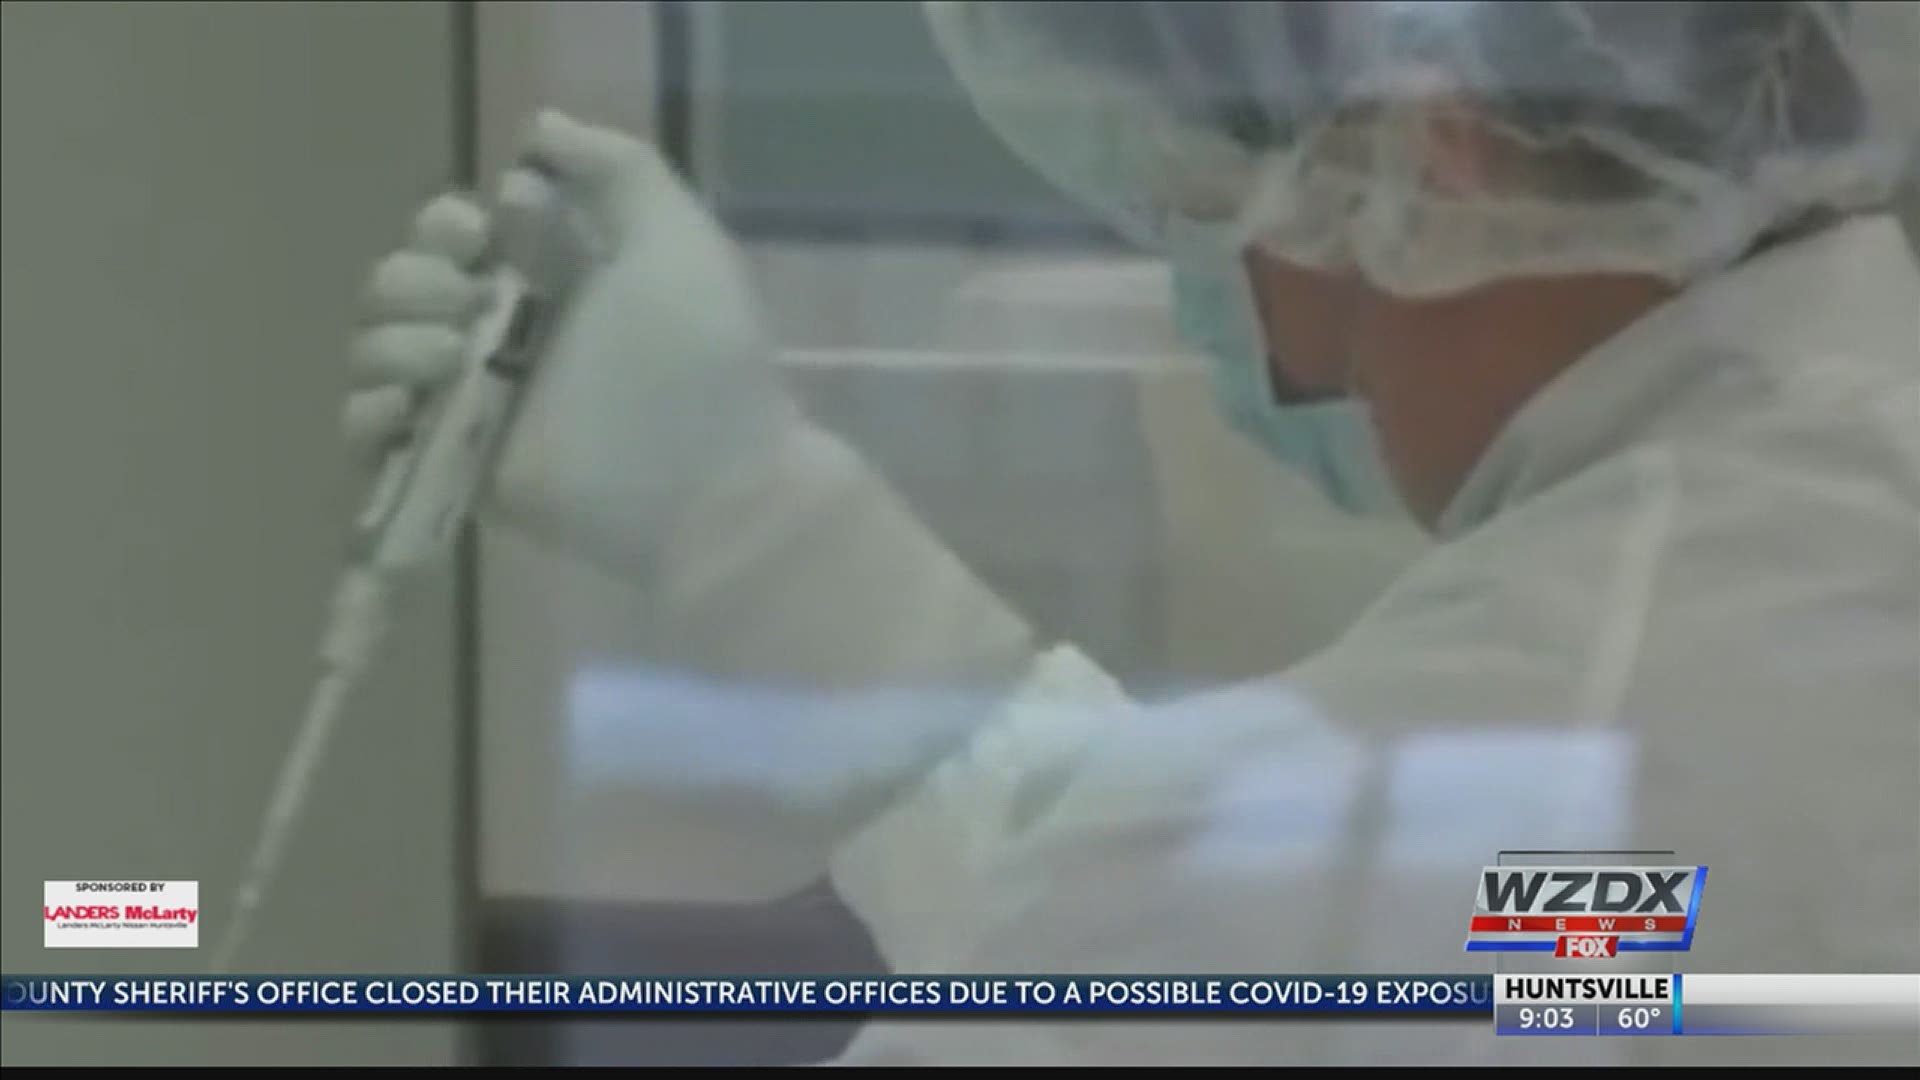 With a lot of news about potential COVID-19 vaccines, UAB doctors warn to remain vigilant.